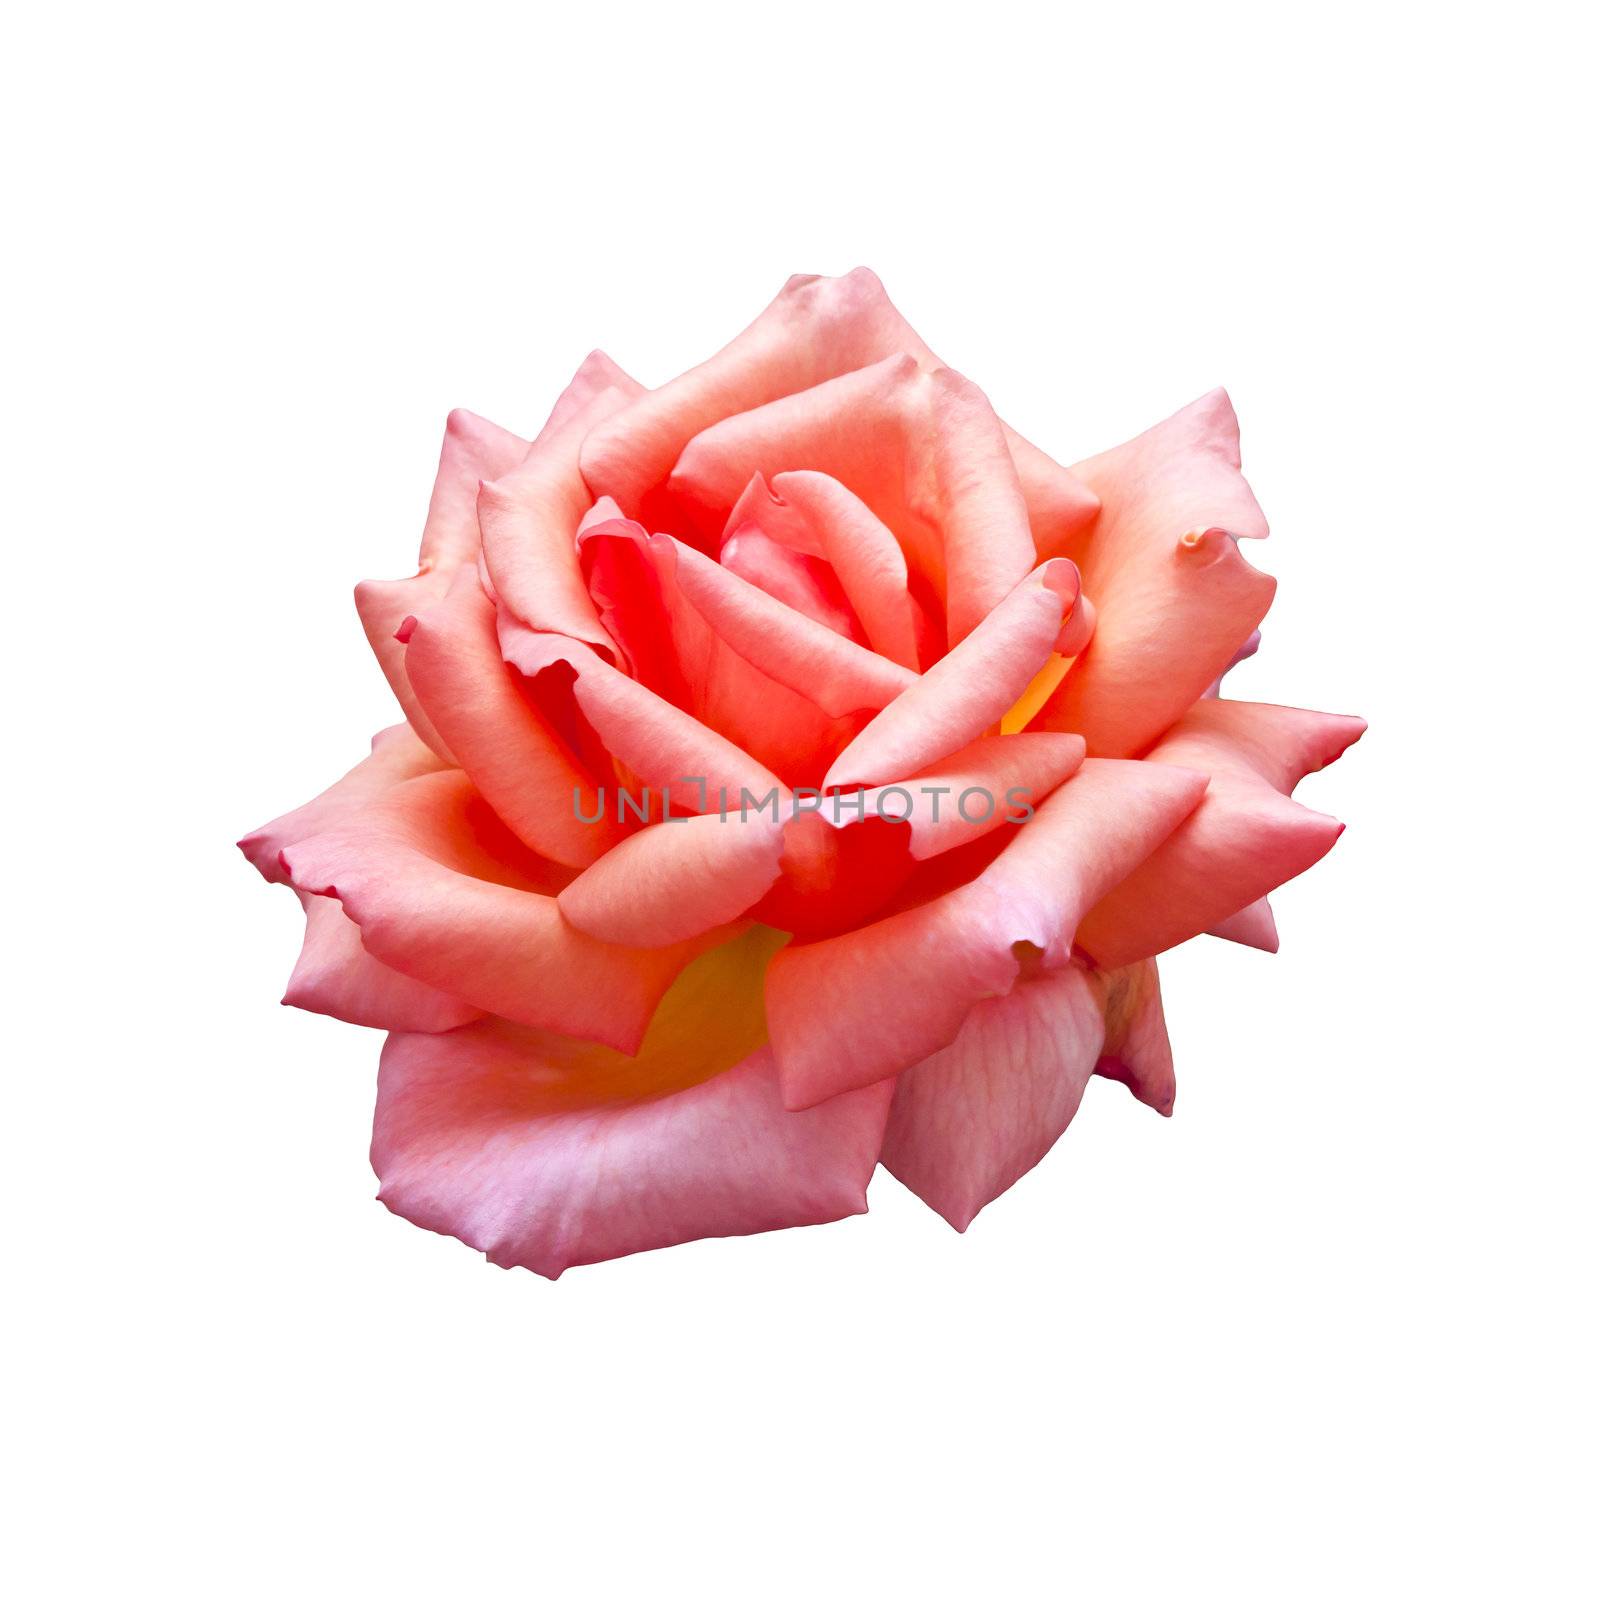 An image of a nice rose isolated on white